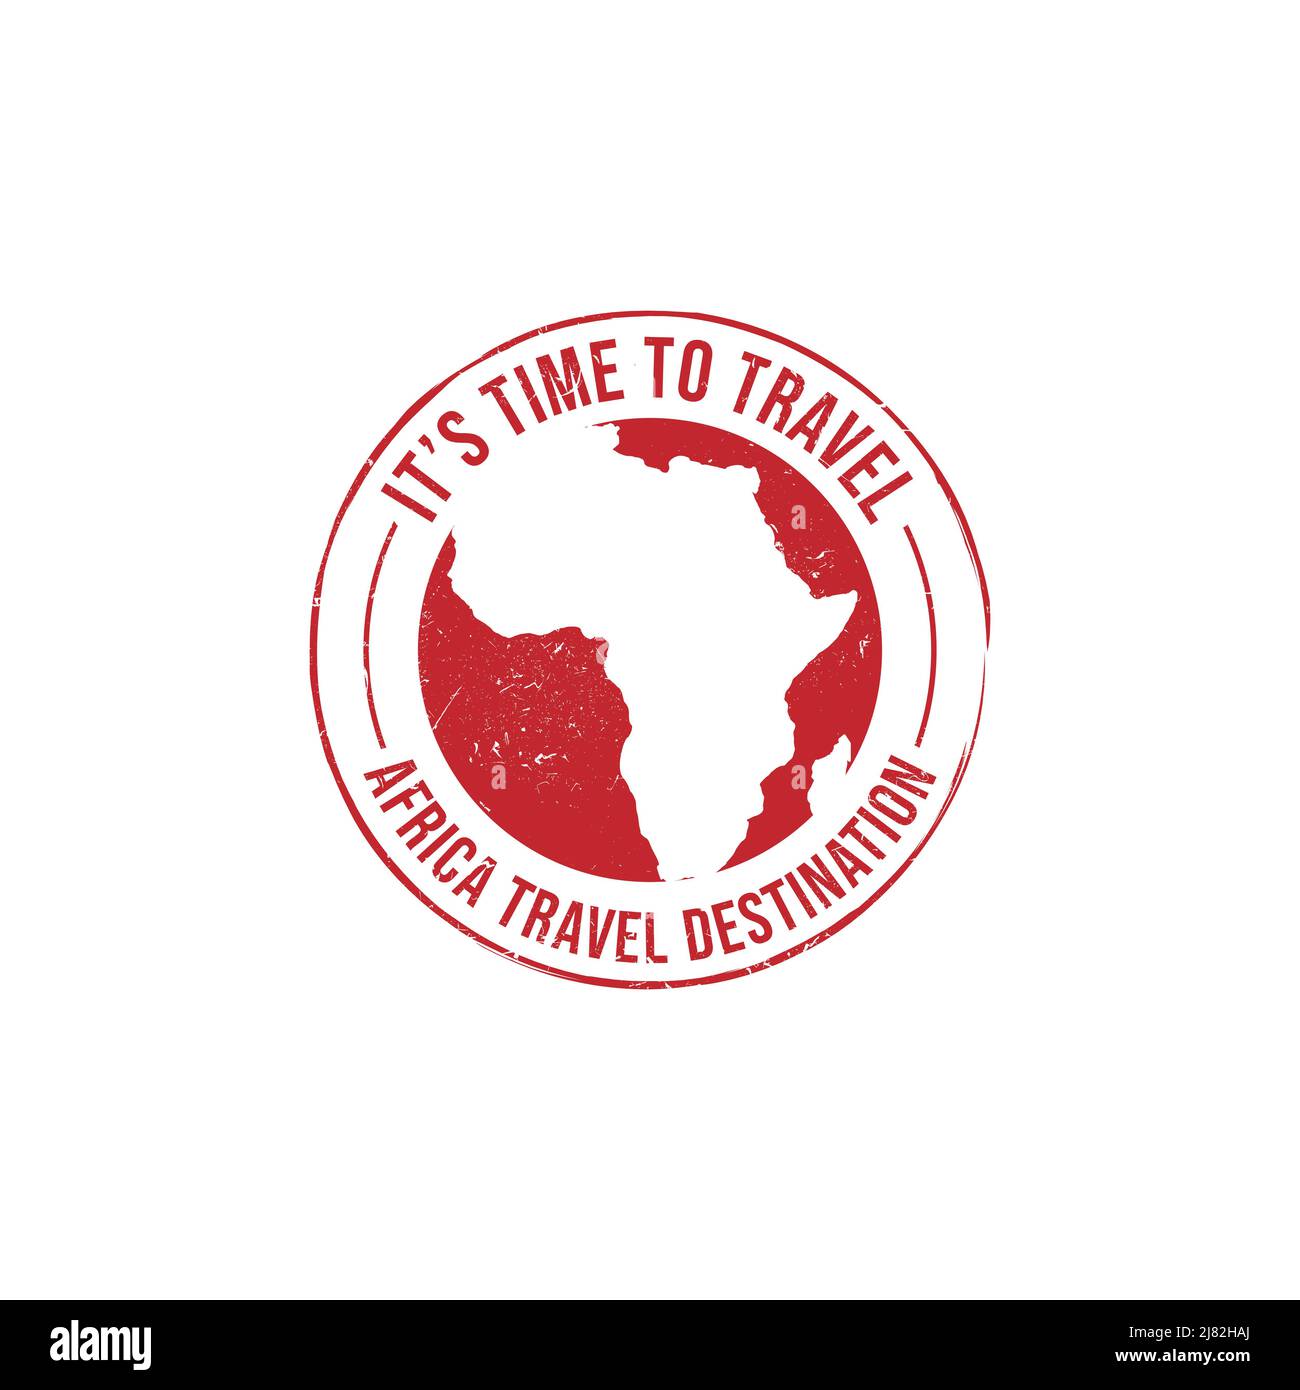 Grunge rubber stamp with the text Africa icon map travel destination written inside the stamp. Africa travel destination grunge rubber stamp Stock Vector